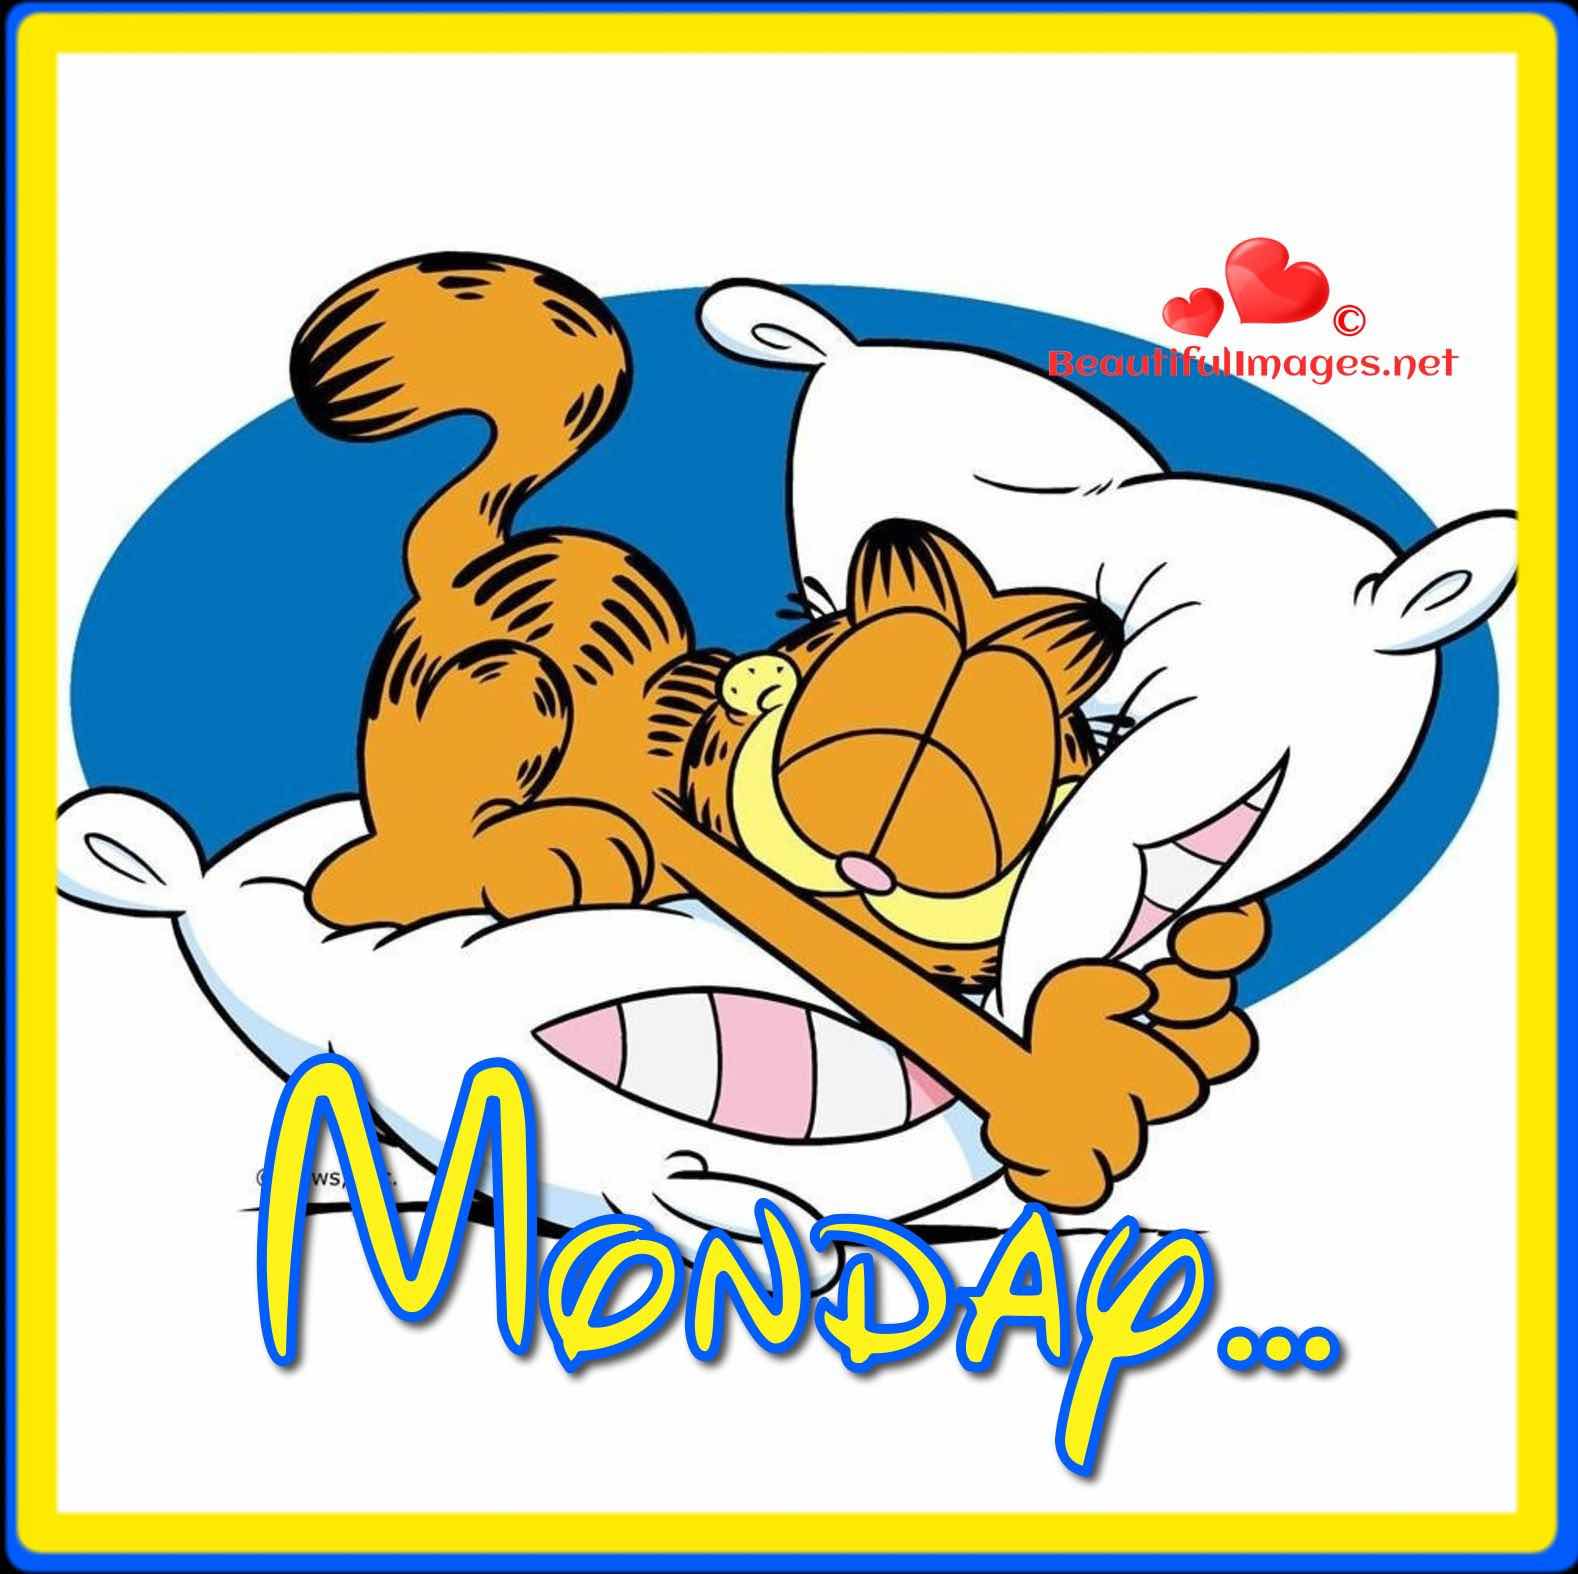 Monday-Garfield-Images-Quotes-Beautiful-Facebook-Whatsapp